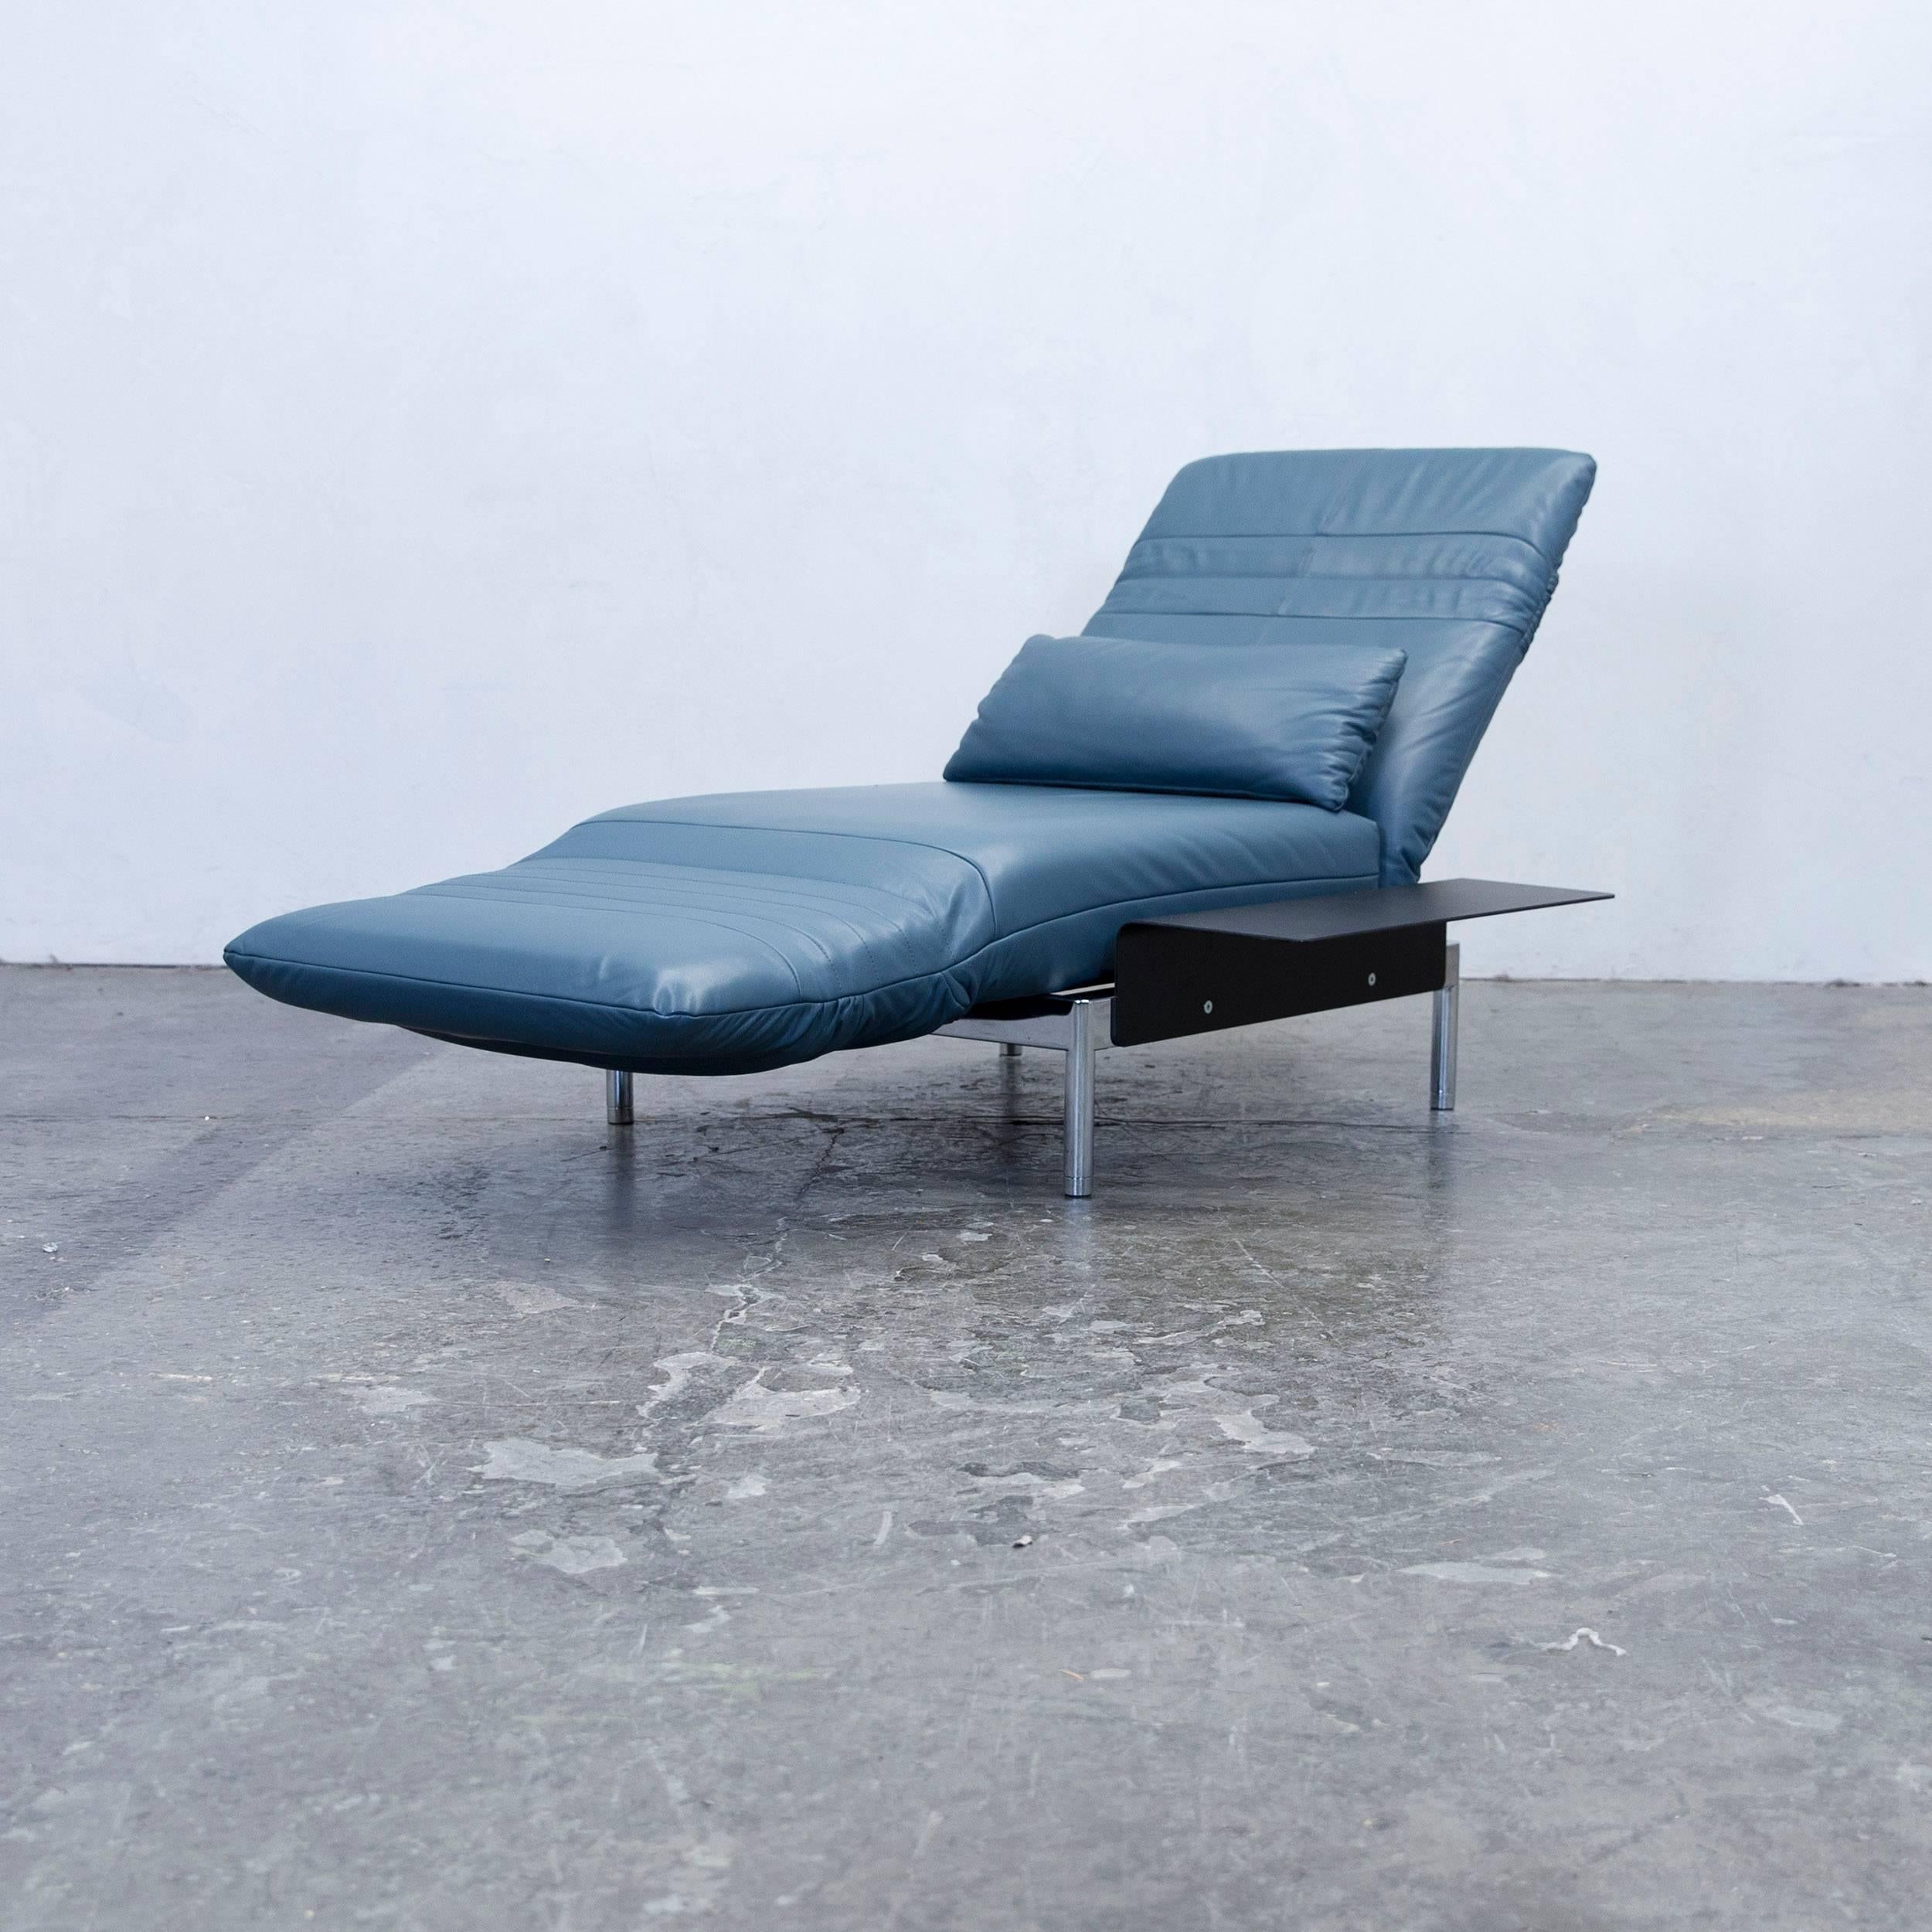 Blue colored original Rolf Benz Plura designer leather chair, in a minimalistic and modern design, with convenient functions, made for pure comfort and flexibility.